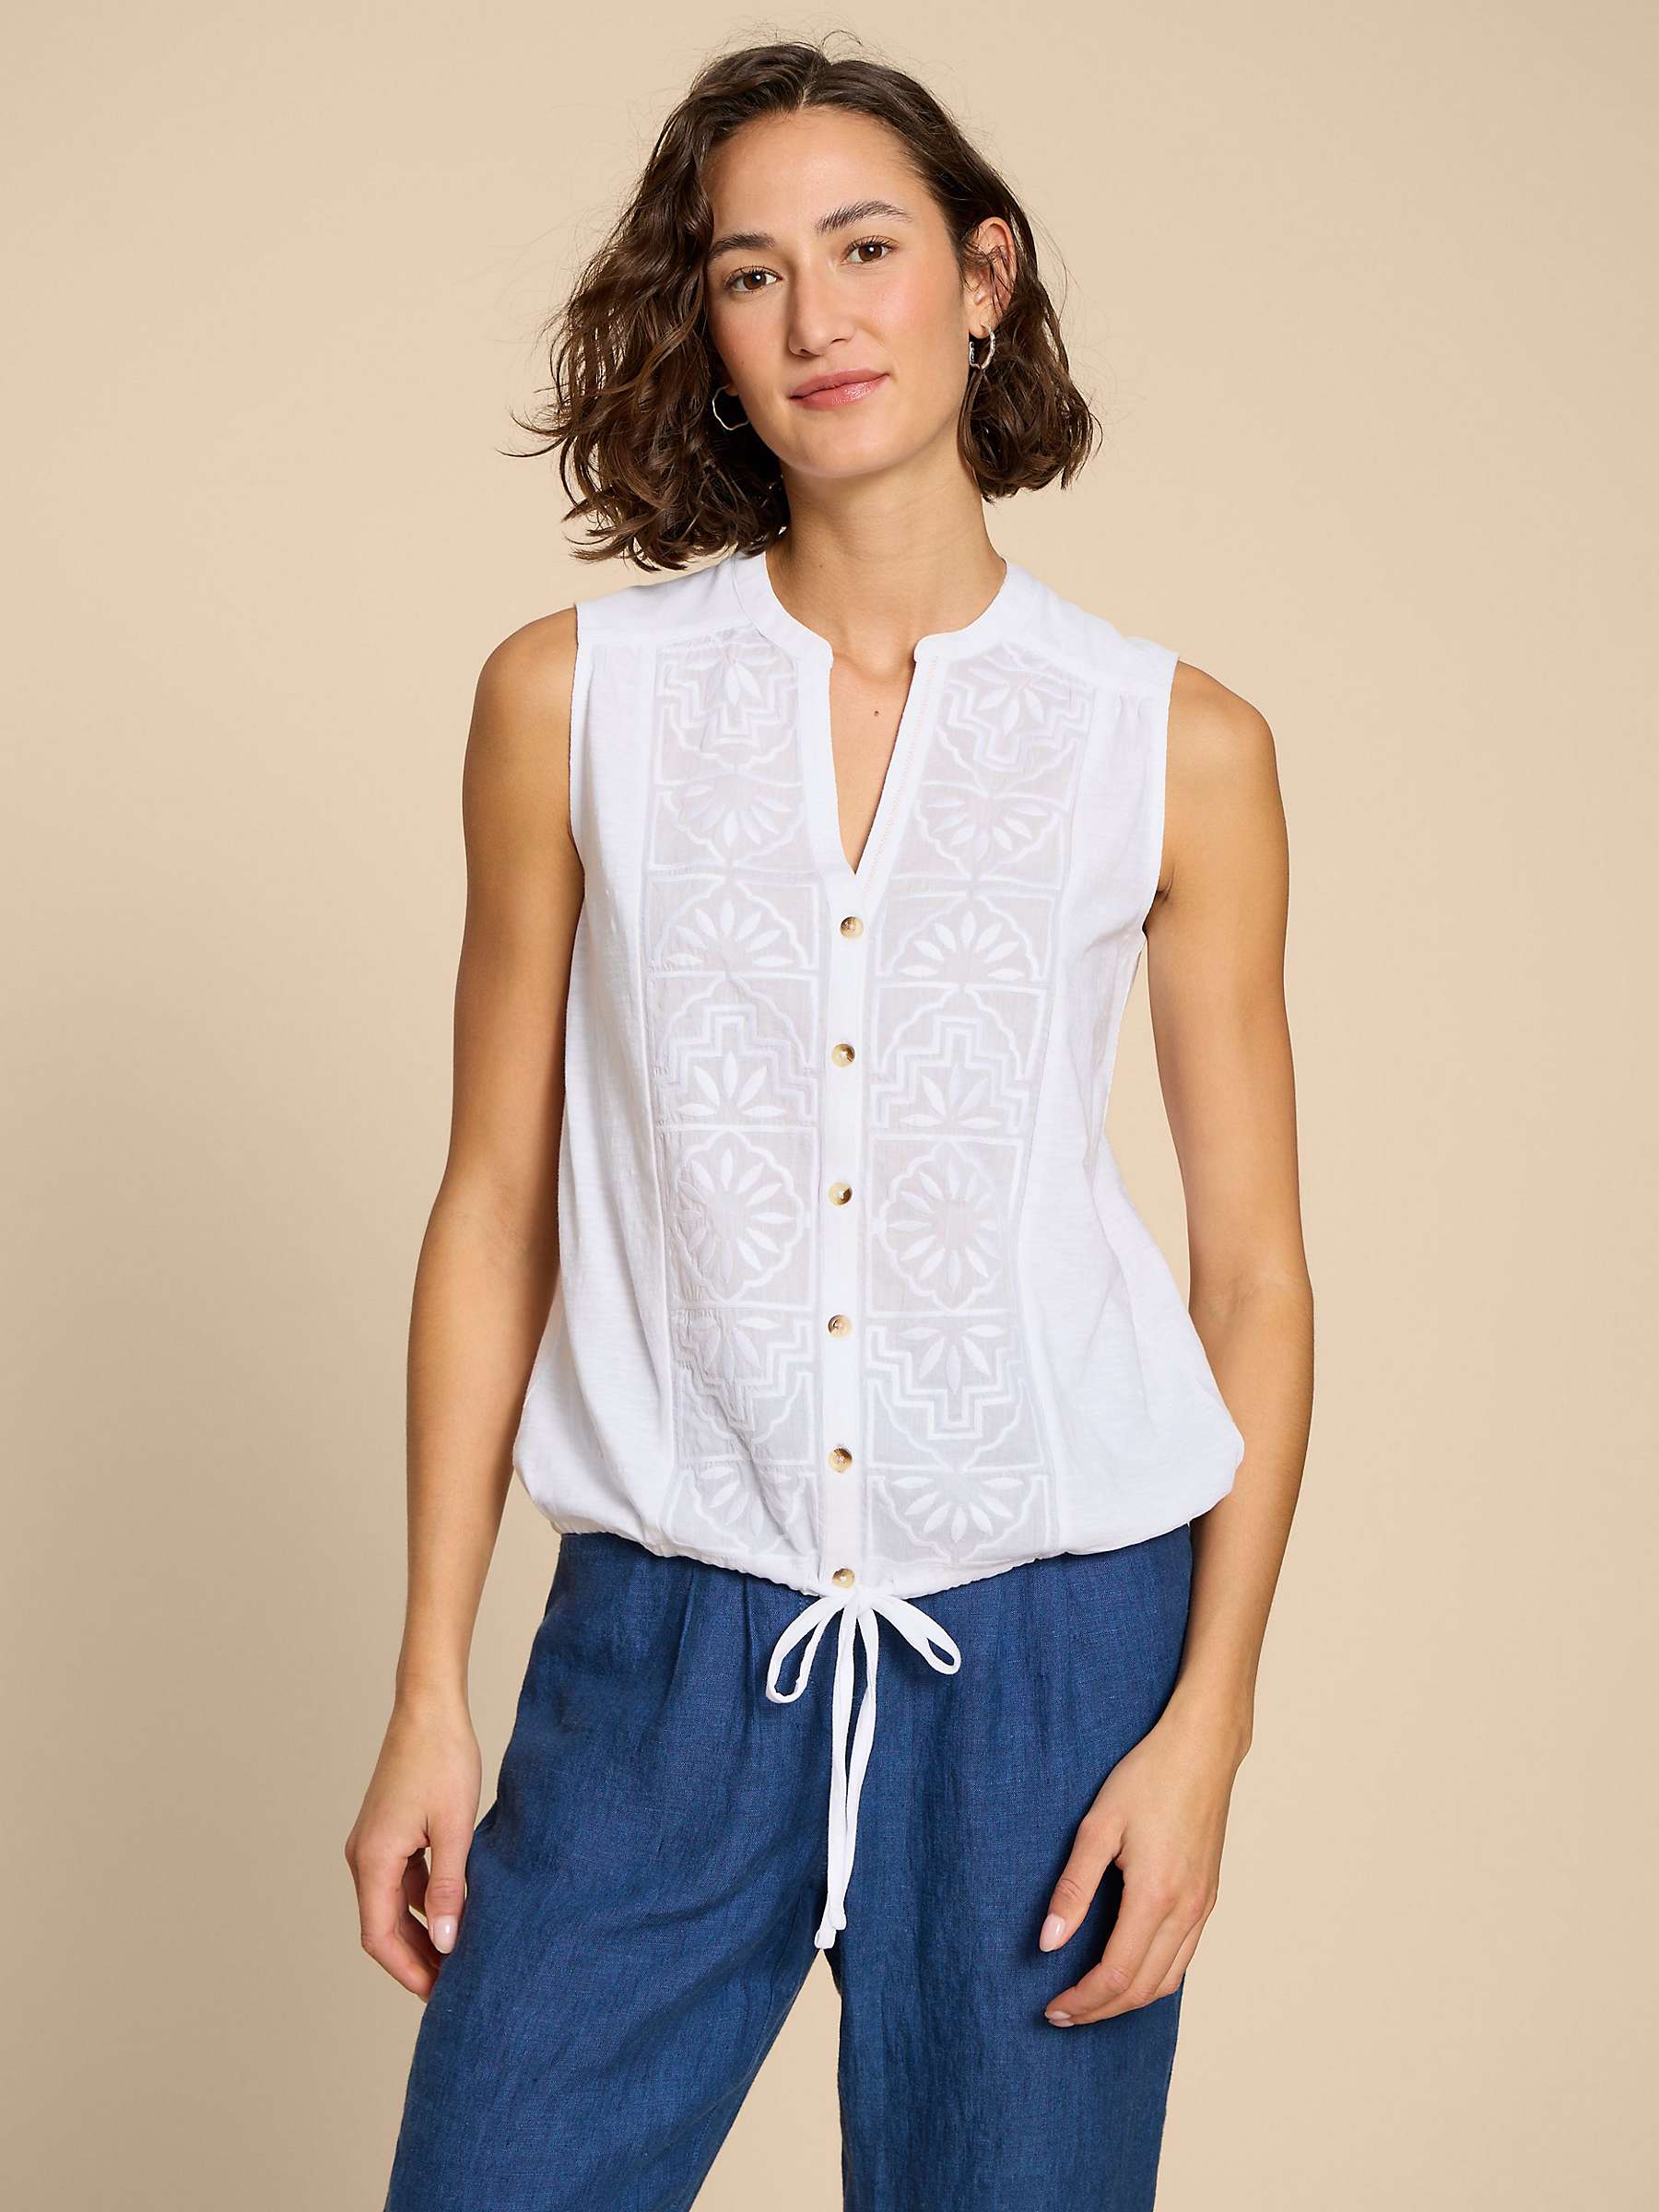 Buy White Stuff Tulip Jersey Sleeveless Top, Pale Ivory Online at johnlewis.com